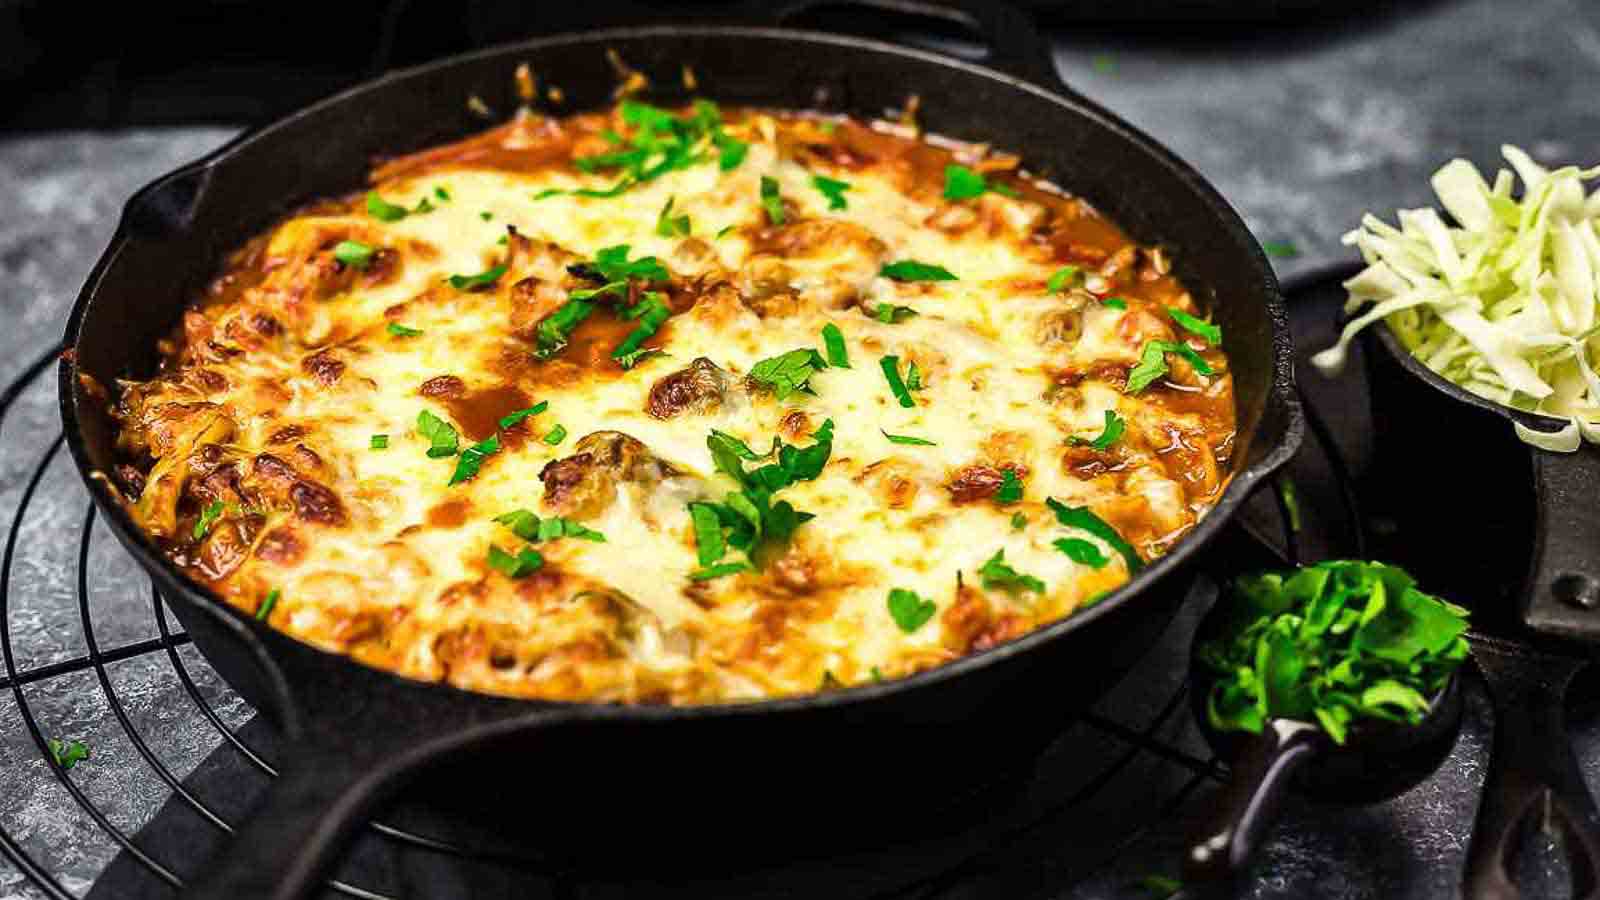 A skillet full of meat, cabbage and cheese on a table.